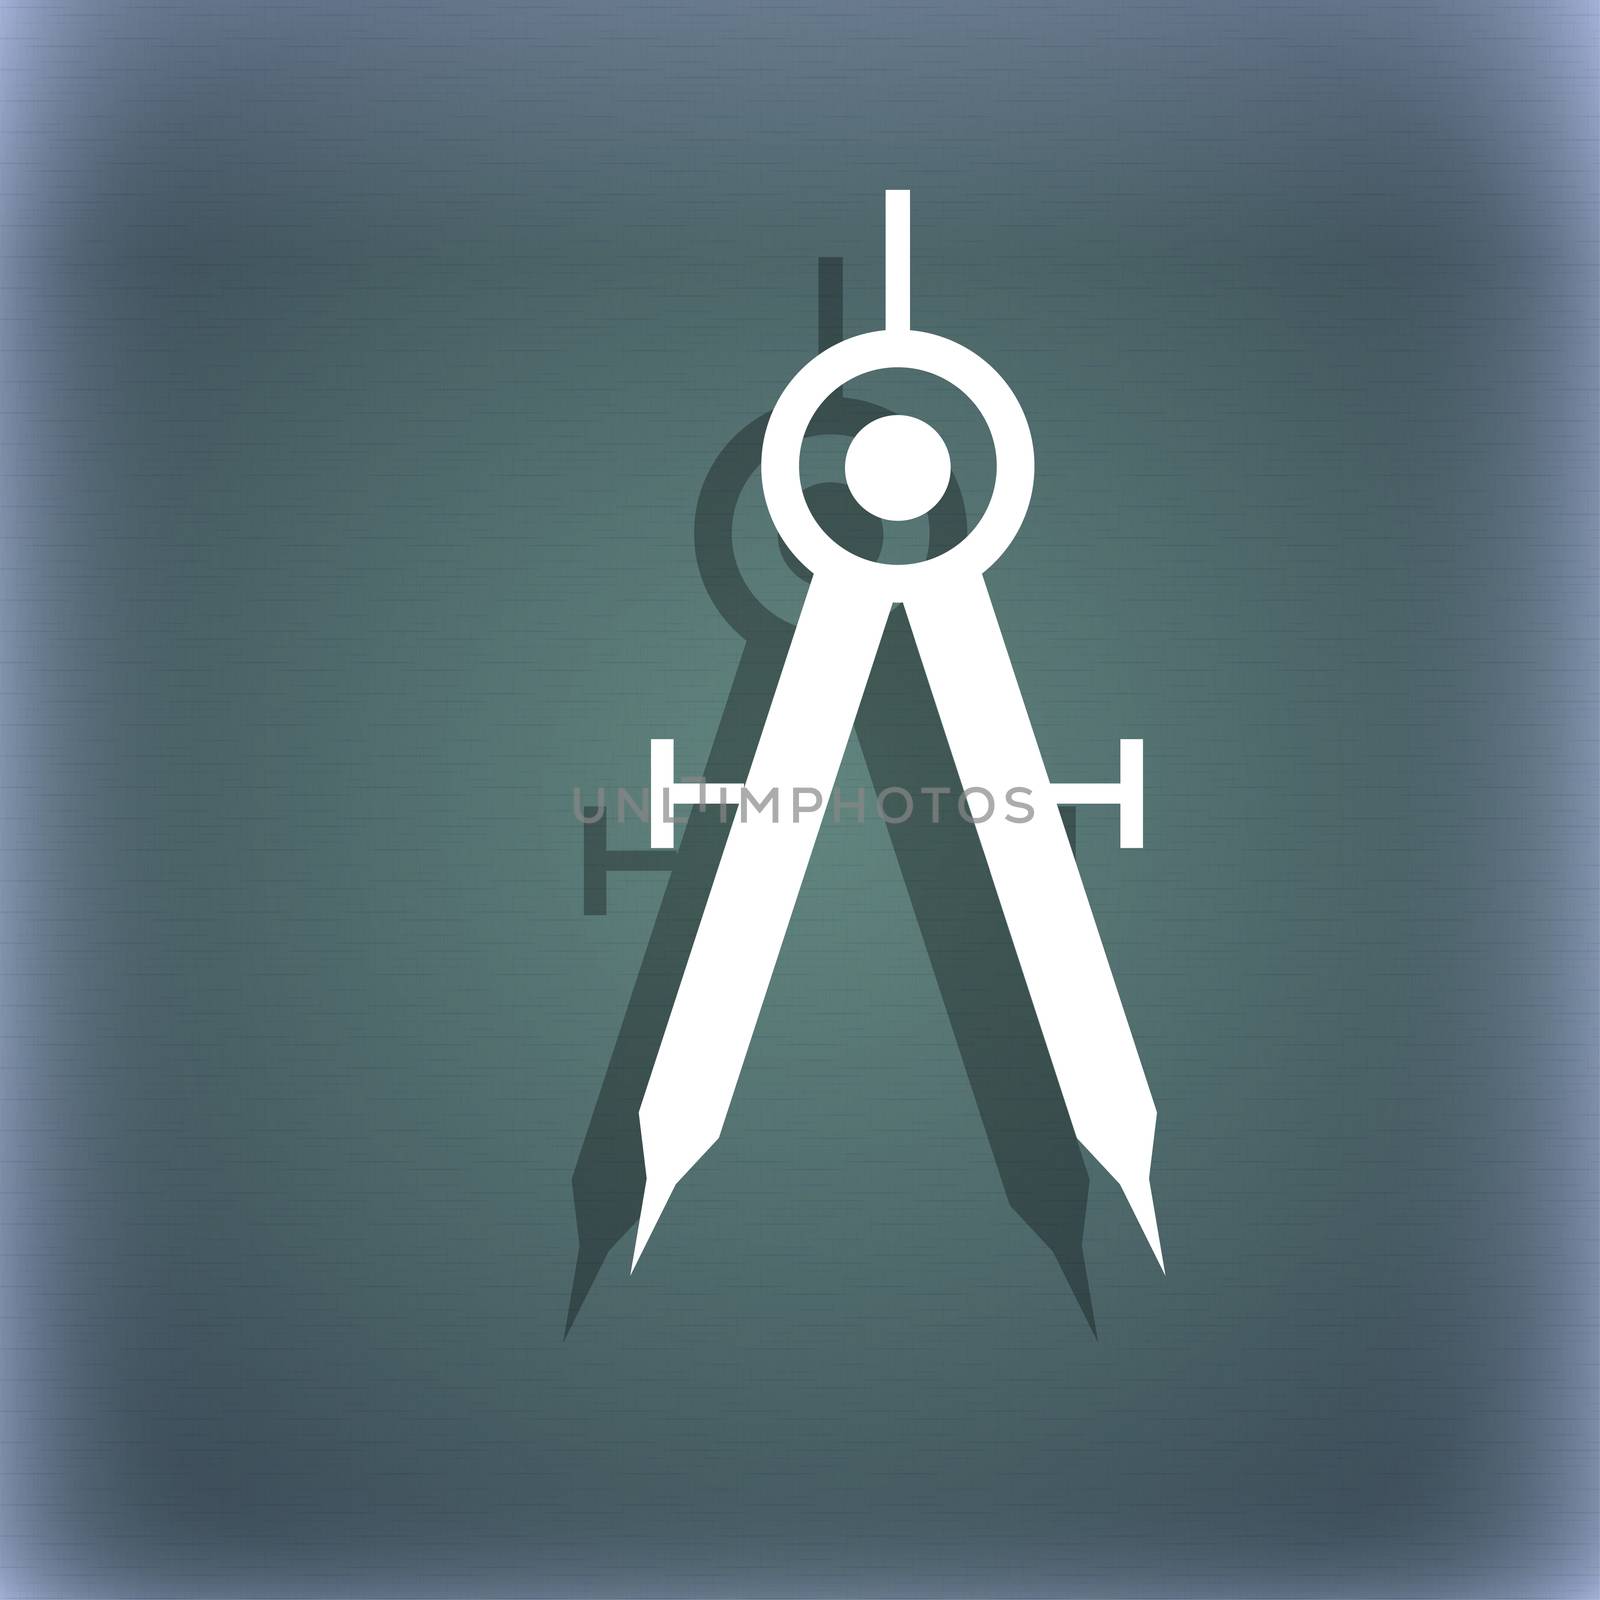 Mathematical Compass sign icon. On the blue-green abstract background with shadow and space for your text. illustration